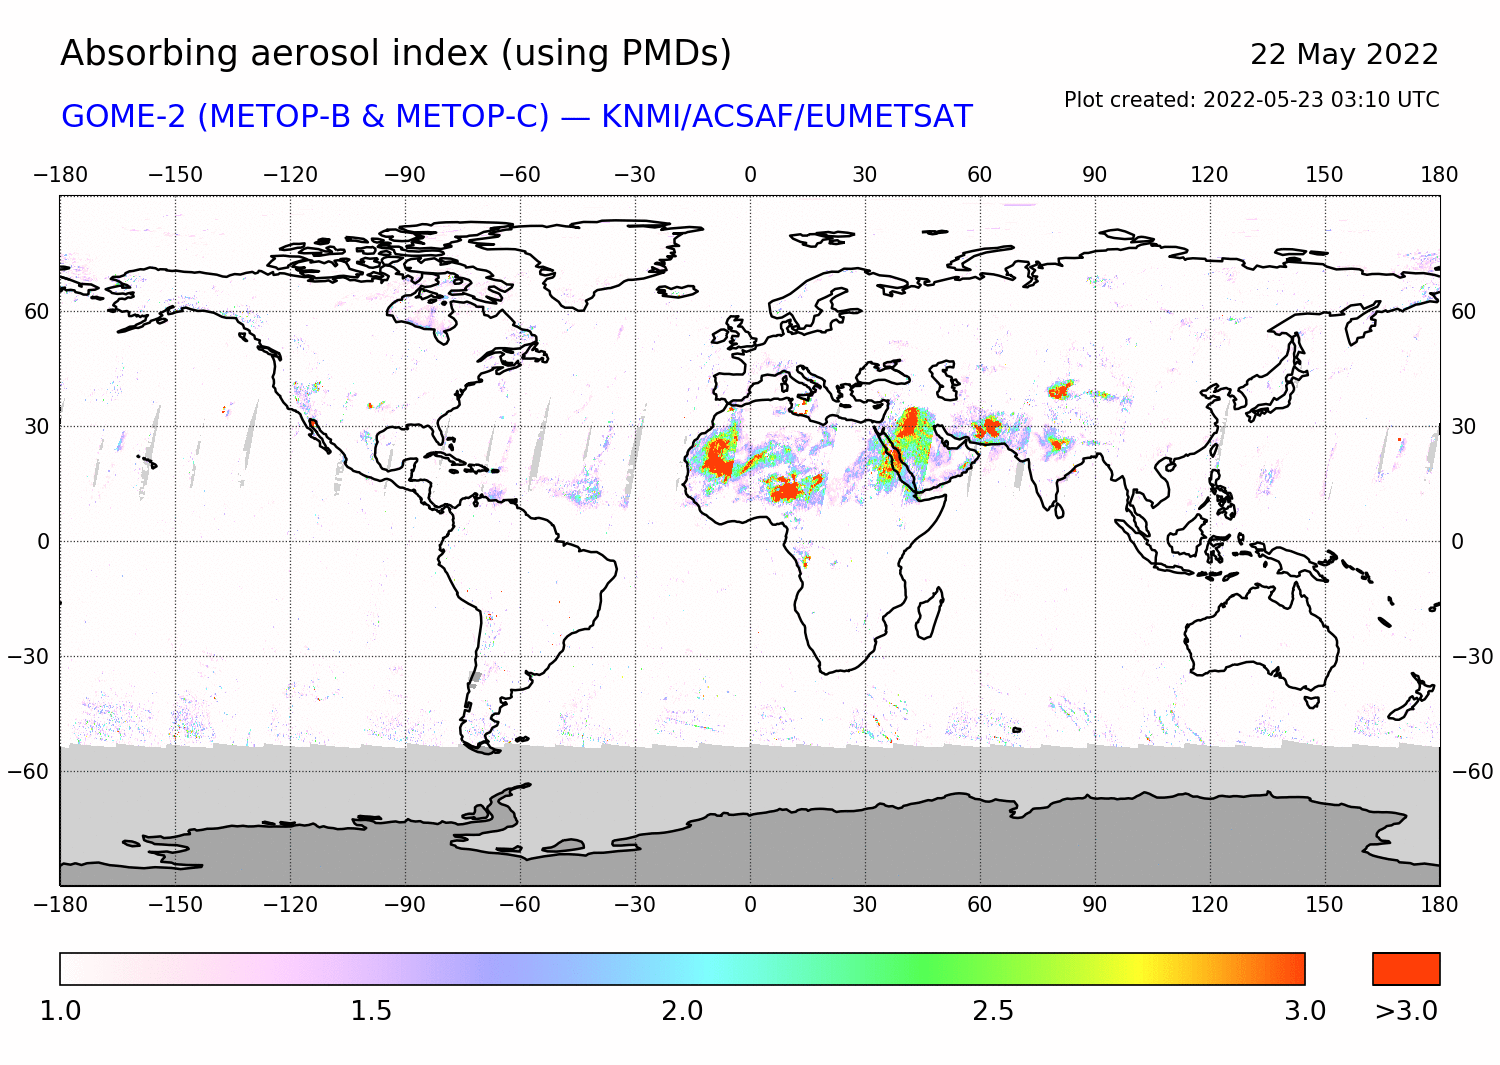 GOME-2 - Absorbing aerosol index of 22 May 2022